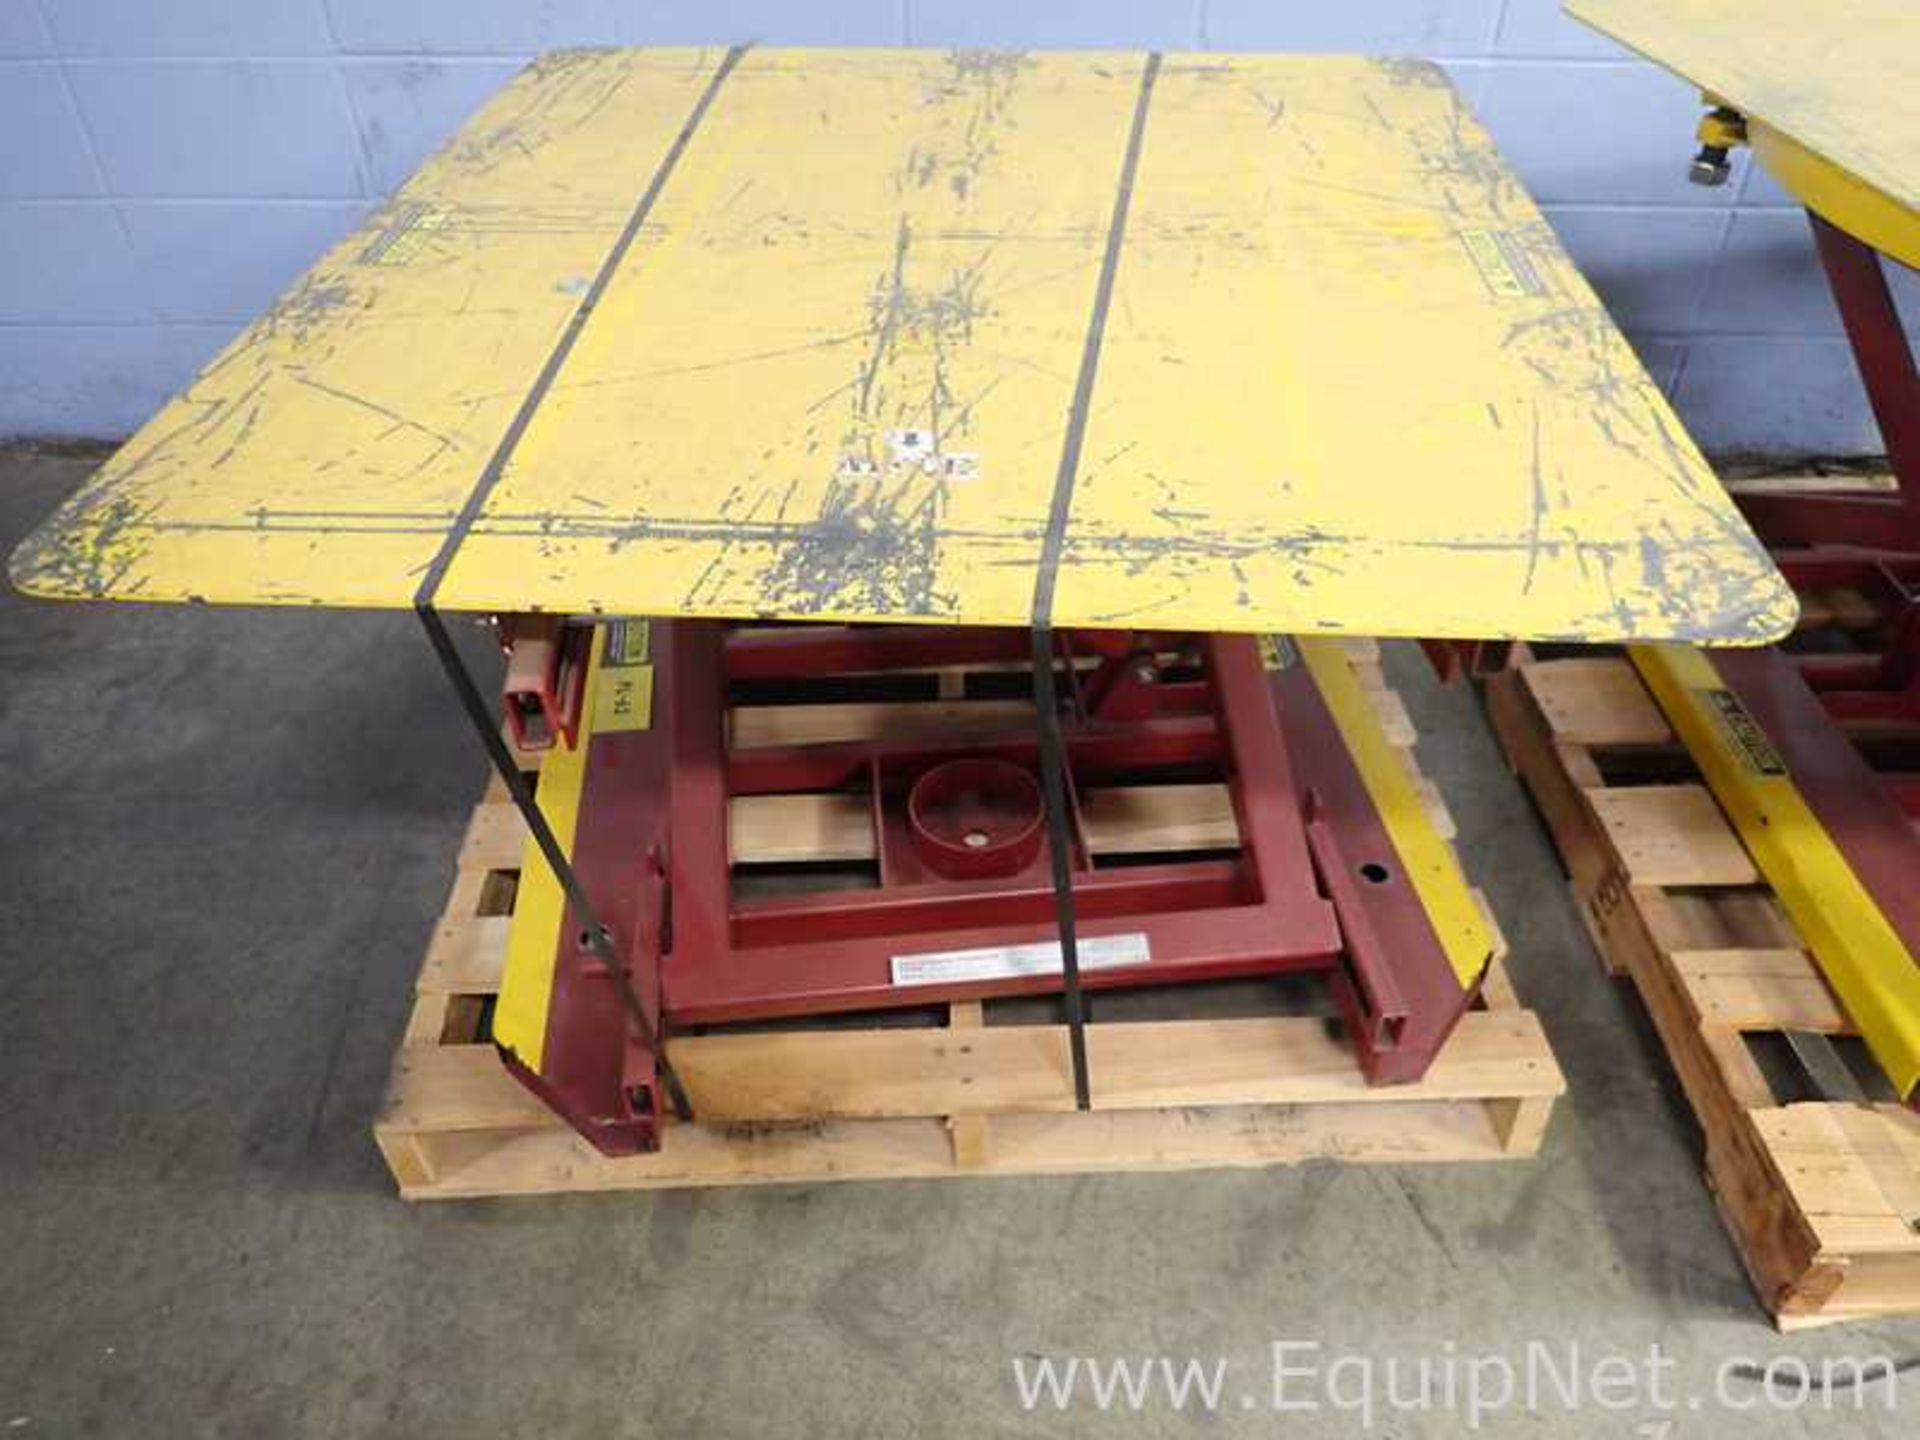 Lot of 2 Southworth Products Spring Actuated Pallet Carousel and Skid Positioners - Image 2 of 8